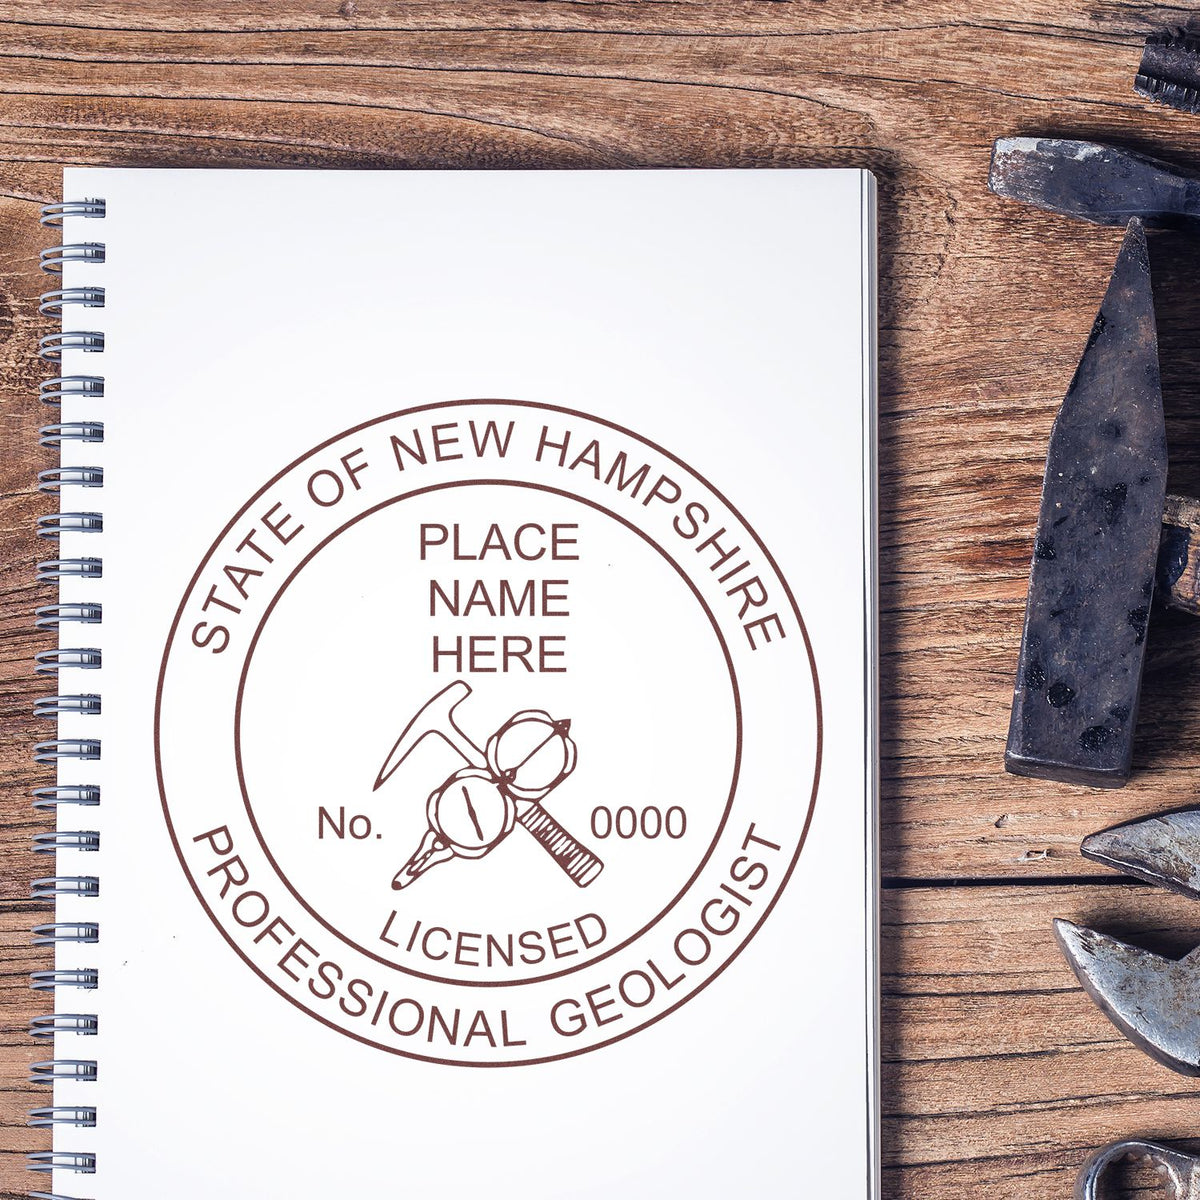 Another Example of a stamped impression of the Digital New Hampshire Geologist Stamp, Electronic Seal for New Hampshire Geologist on a office form